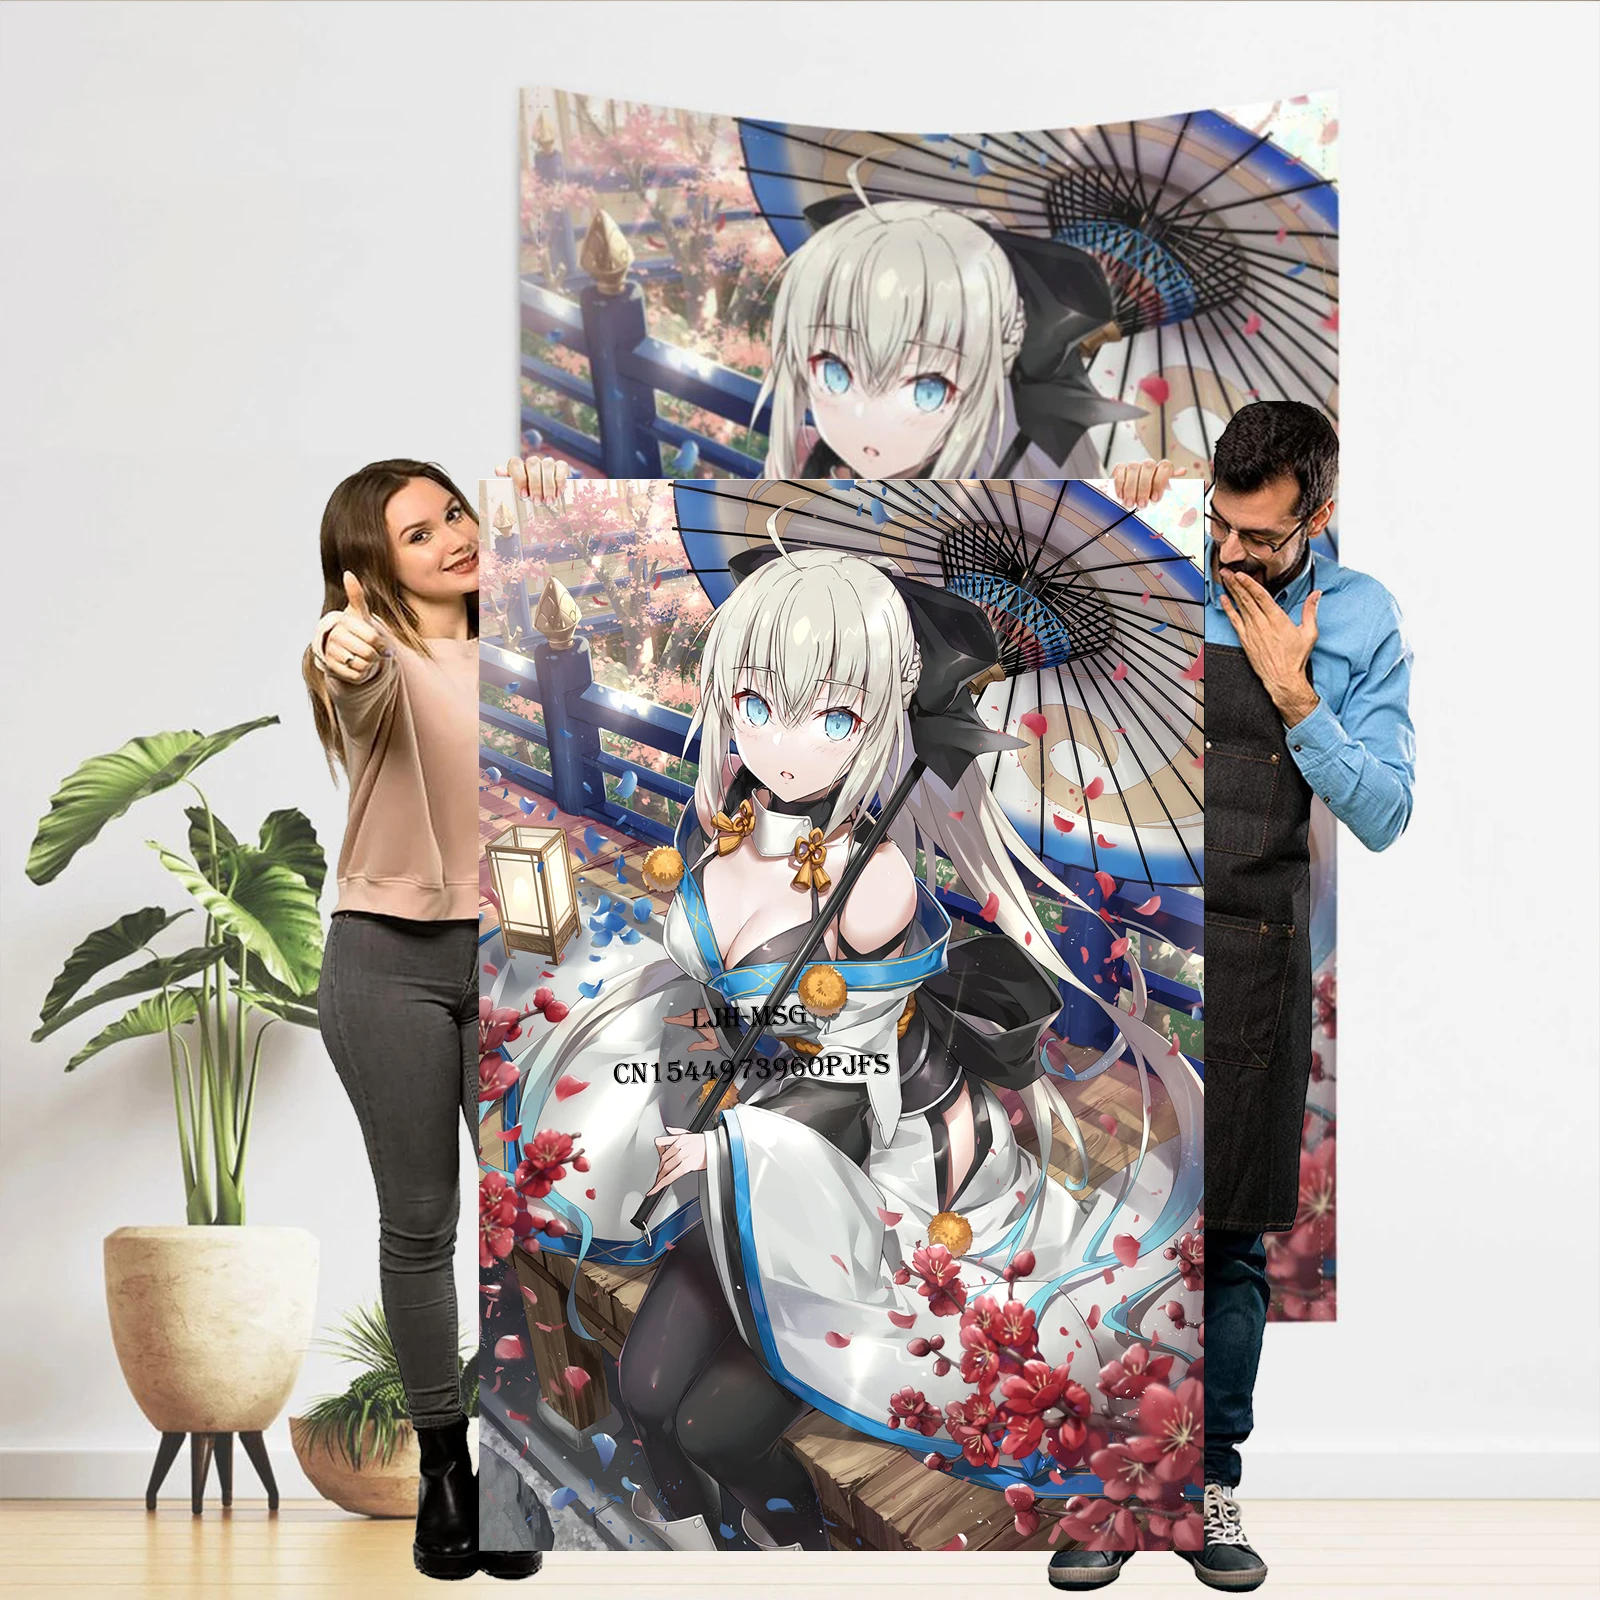 

FGO Tapestry Hentai Anime Poster Fate Grand Order Wall Hanging Artist CG Tapestries Sexy Adult Tapestrys H Doujinshi Tapestry